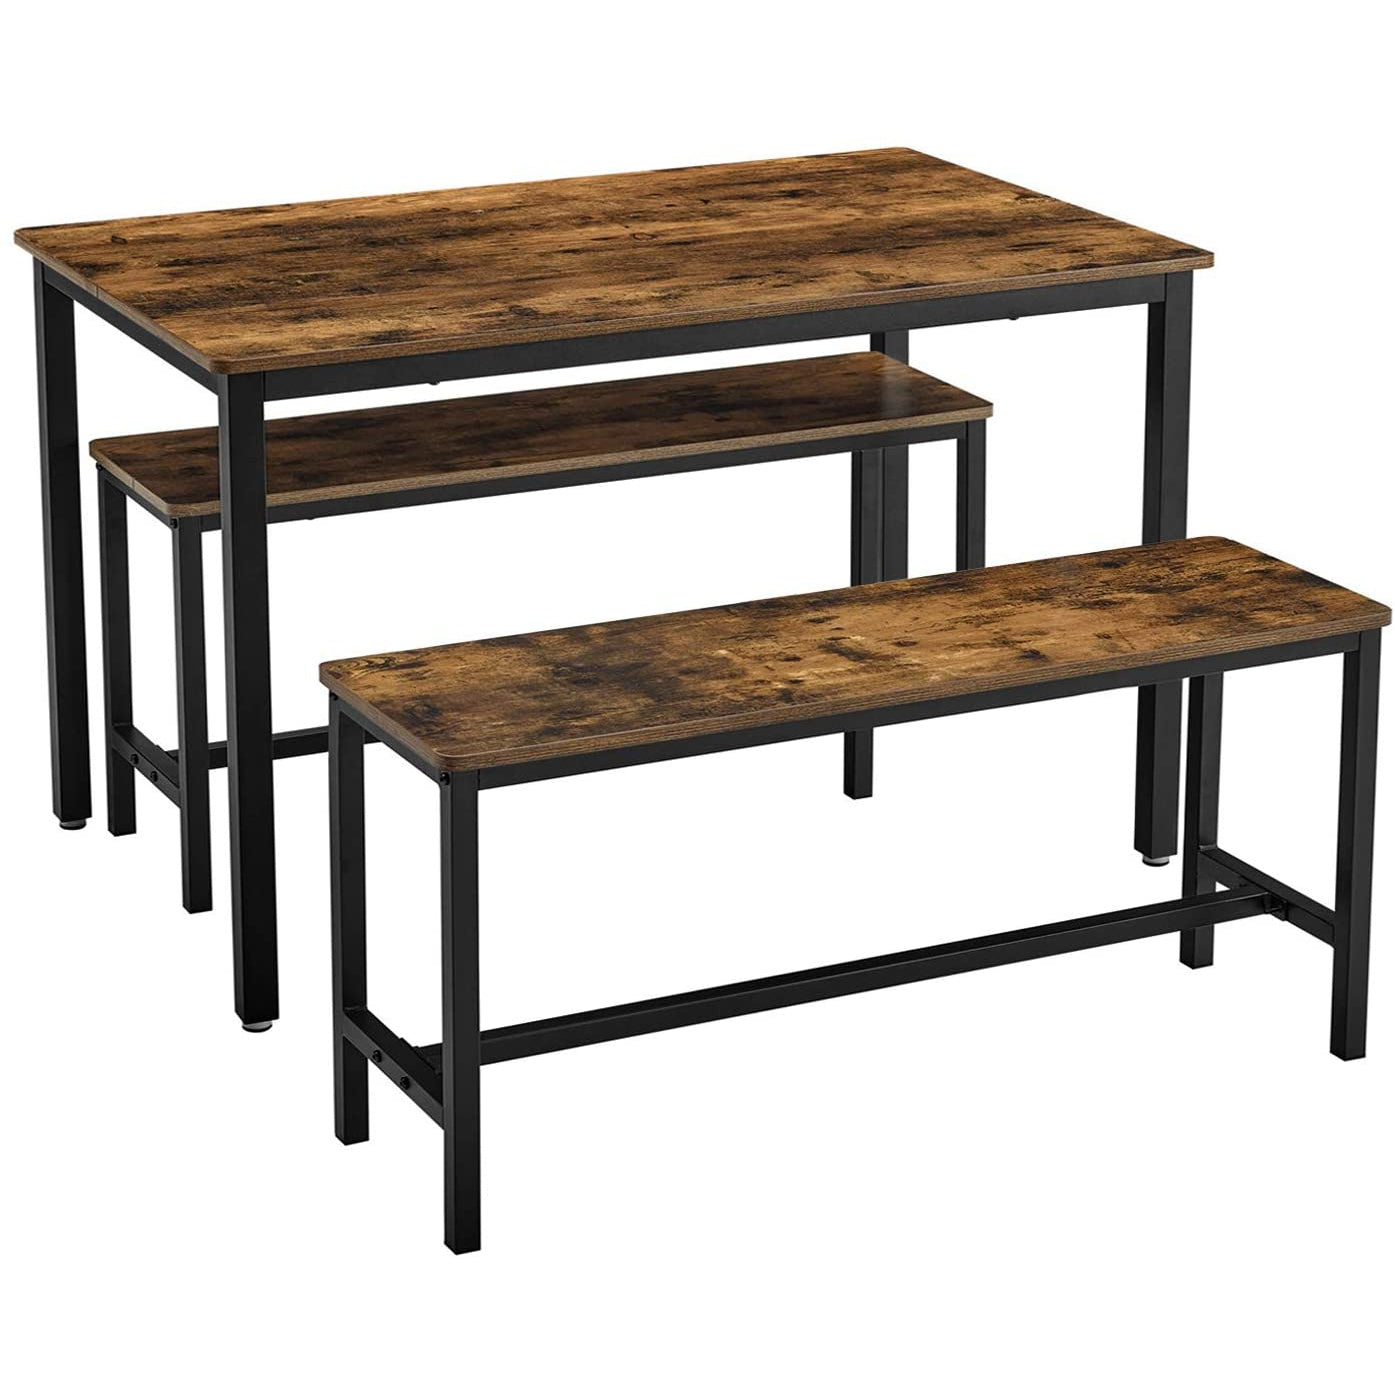 Nancy's Dining Table with 2 Benches - For 4 Persons - Kitchen Table - Industrial Table - Dining Room Table - 110 x 75 x 75 cm